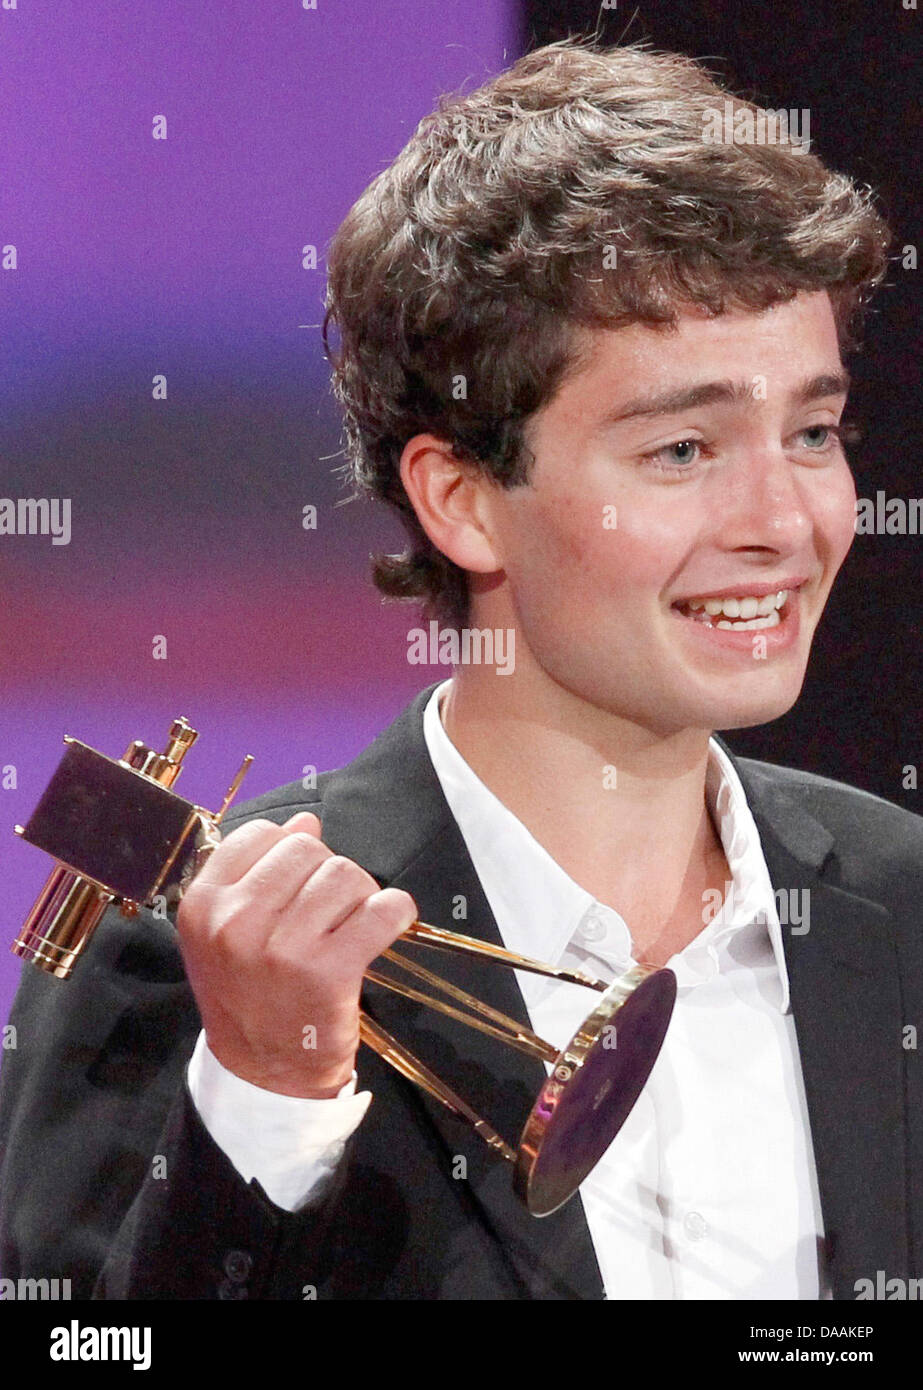 German actor Max Hegewald receives the award for best newcomer during the 46th Golden Camera award ceremony in Berlin, Germany, 5 February 2011. The award honours the audience's favourites from film, television, sports and media. Photo: Tobias Schwarz dpa/lbn Stock Photo